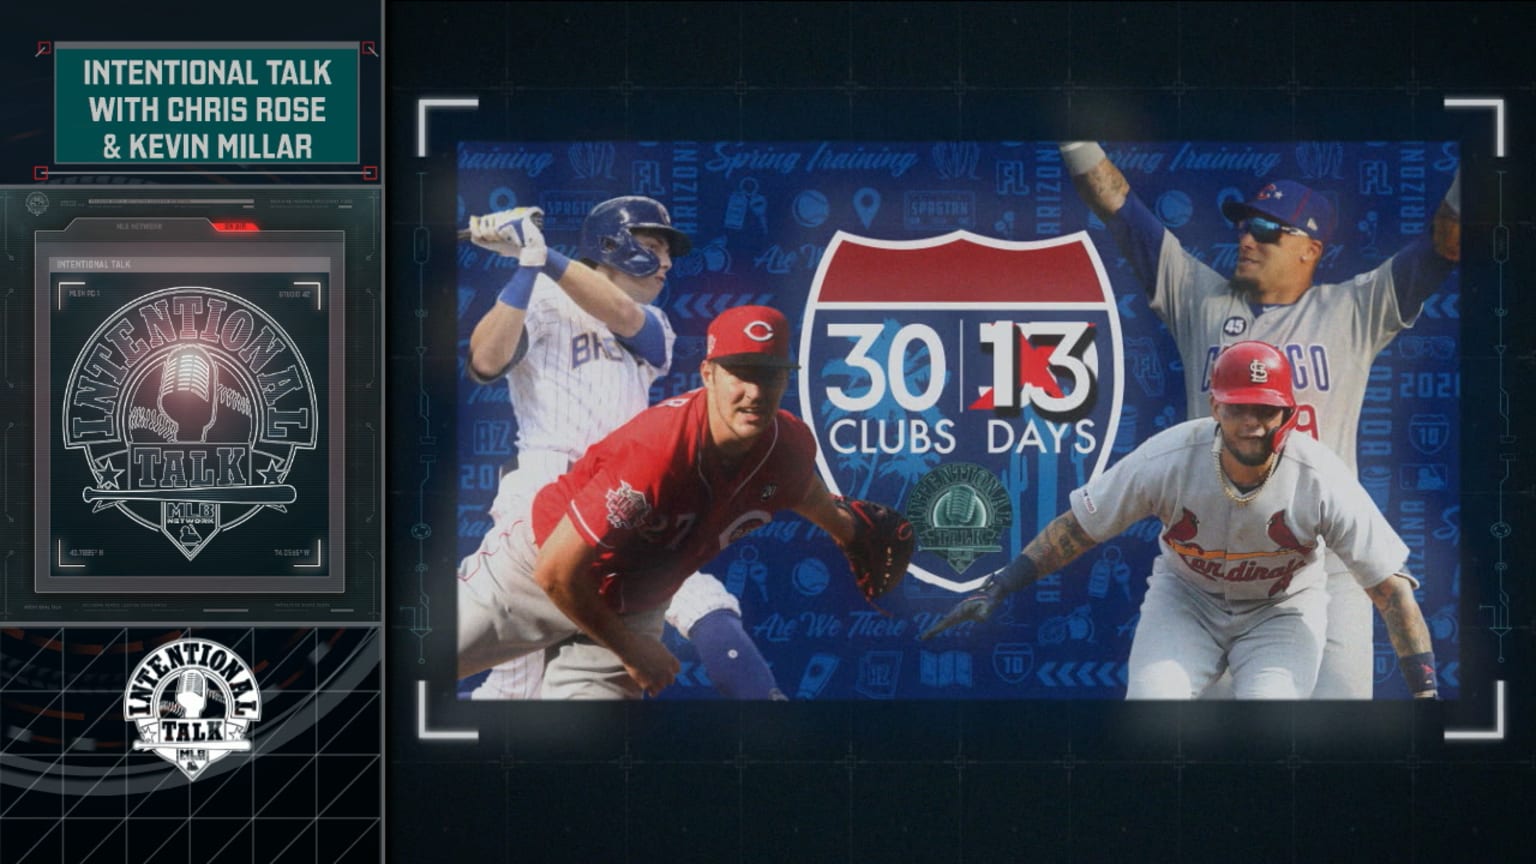 Chris Rose and Kevin Millar preview the NL Central as part of IT's seg...